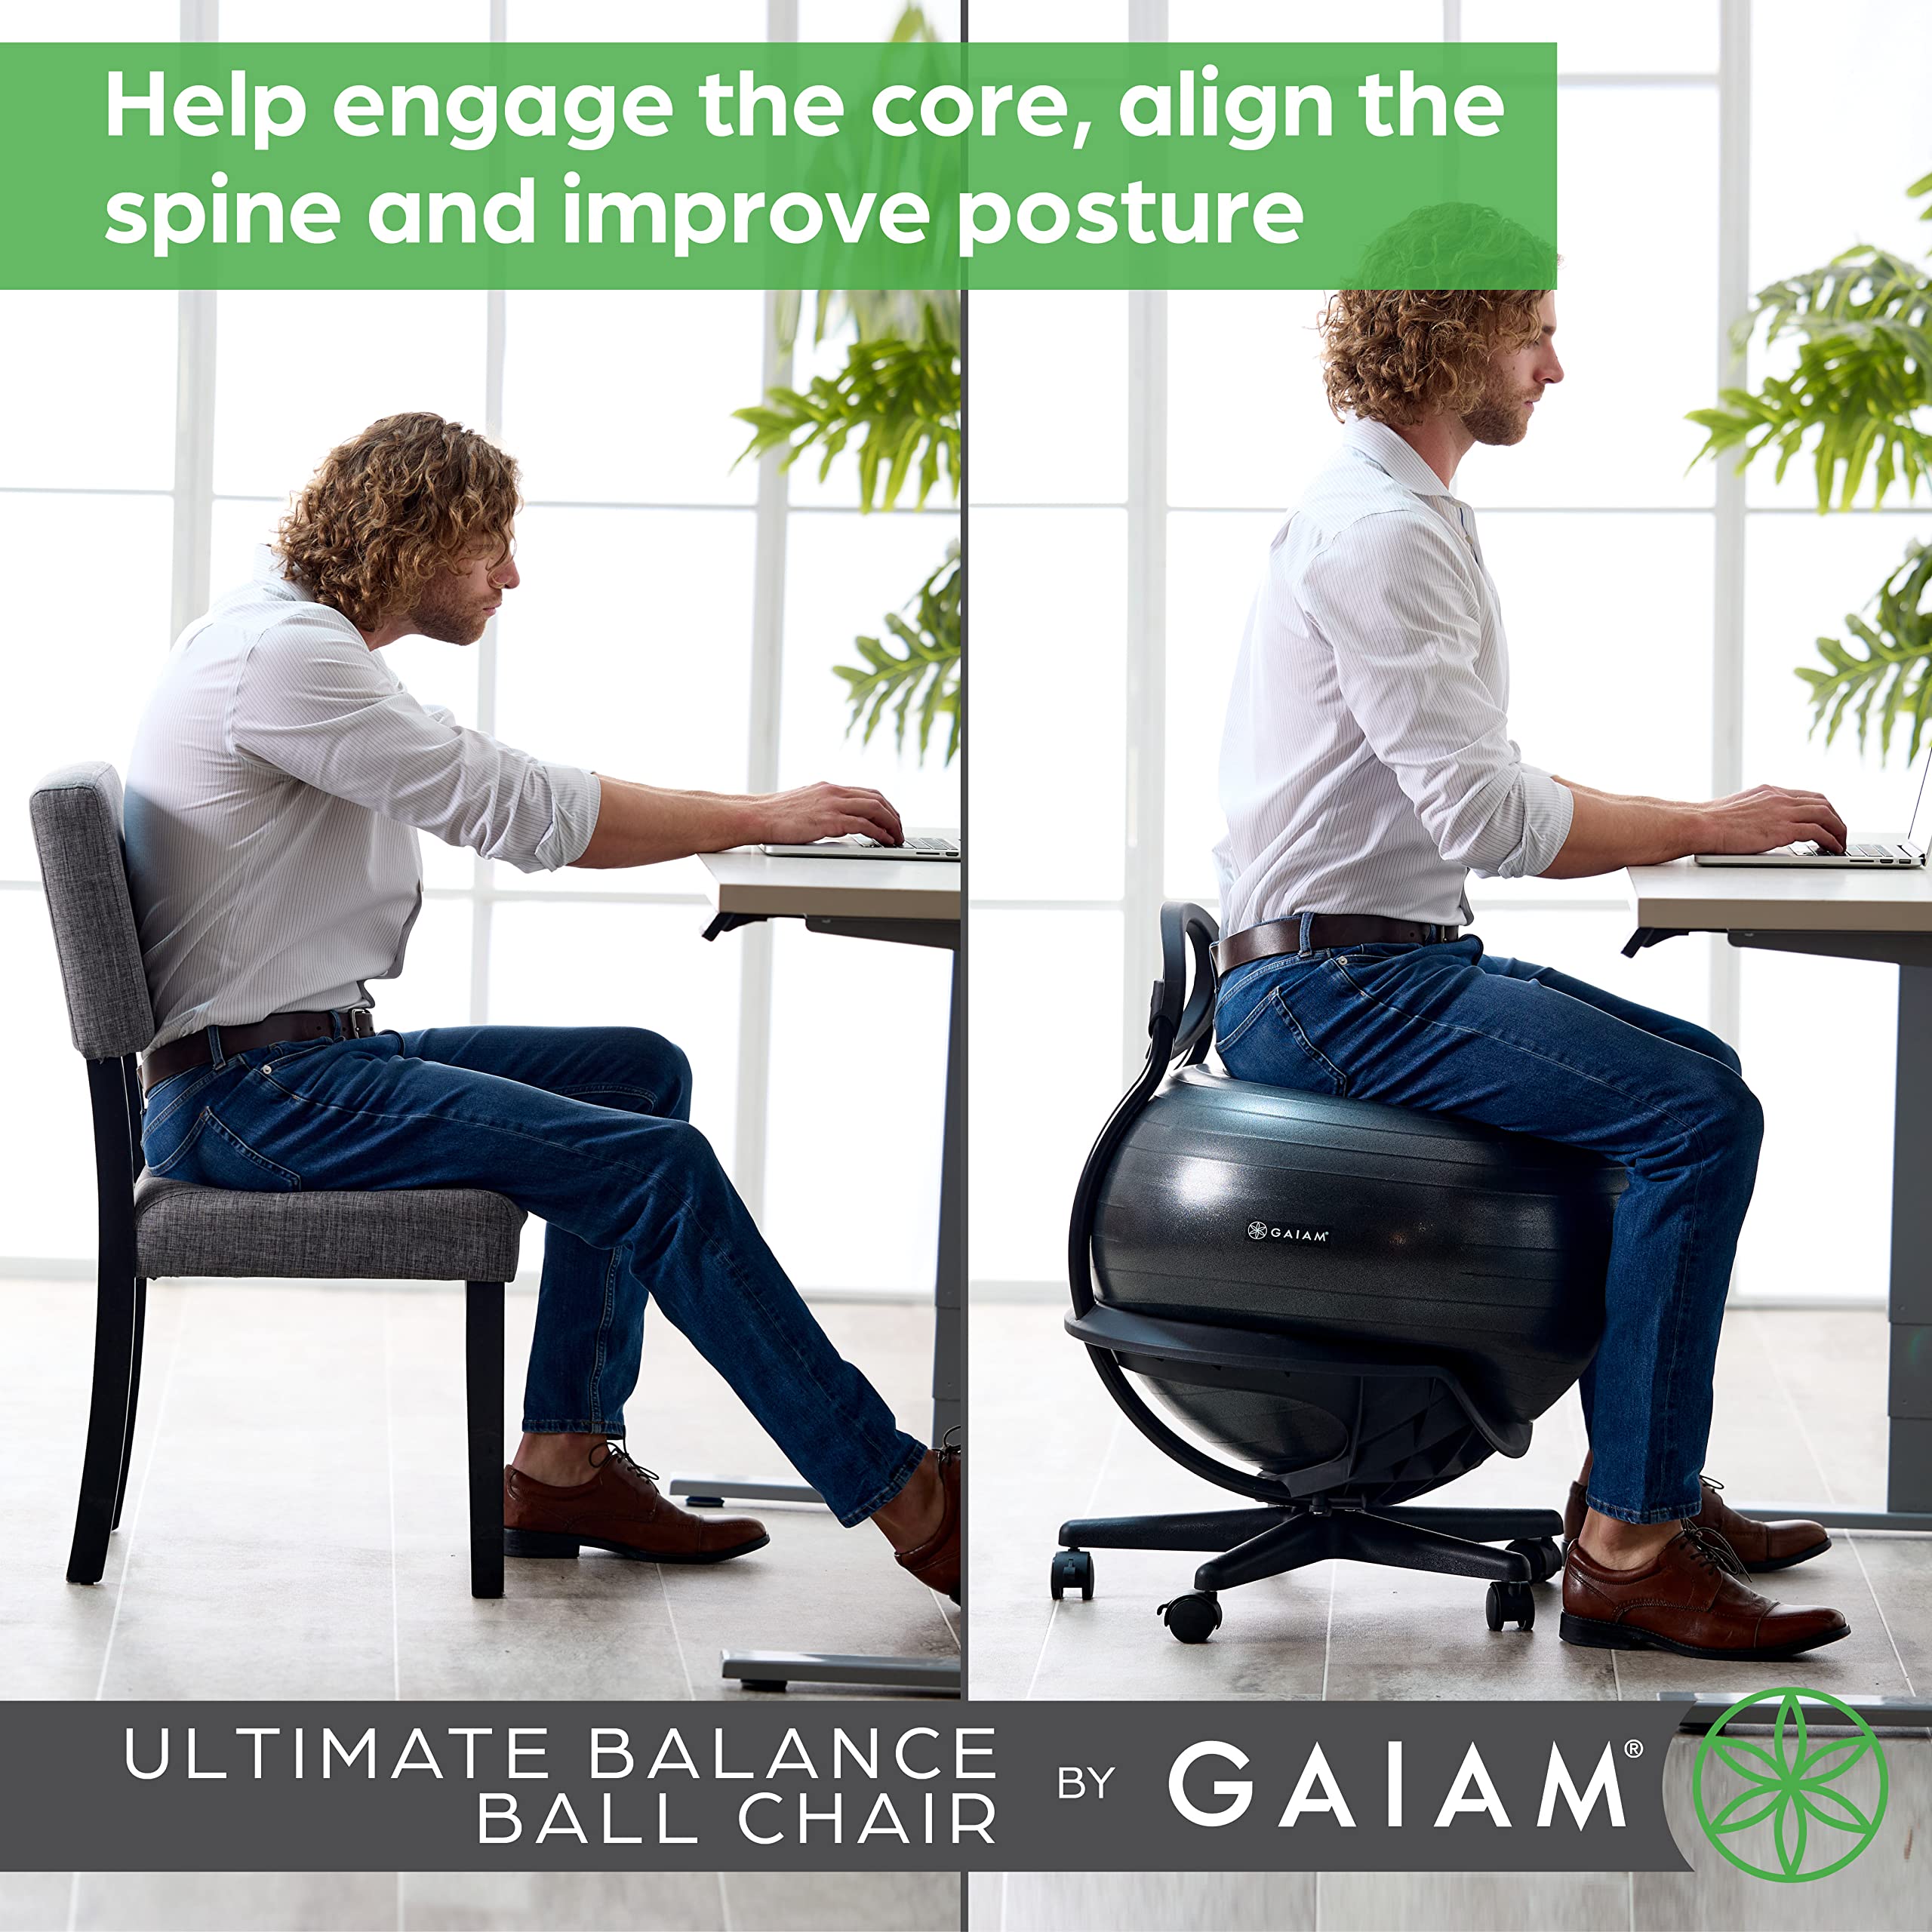 Gaiam Ultimate Balance Ball Chair (Standard or Swivel Base Option) - Premium Exercise Stability Yoga Ball Ergonomic Chair for Home and Office Desk - 52cm Anti-Burst Ball, Air Pump, Exercise Guide